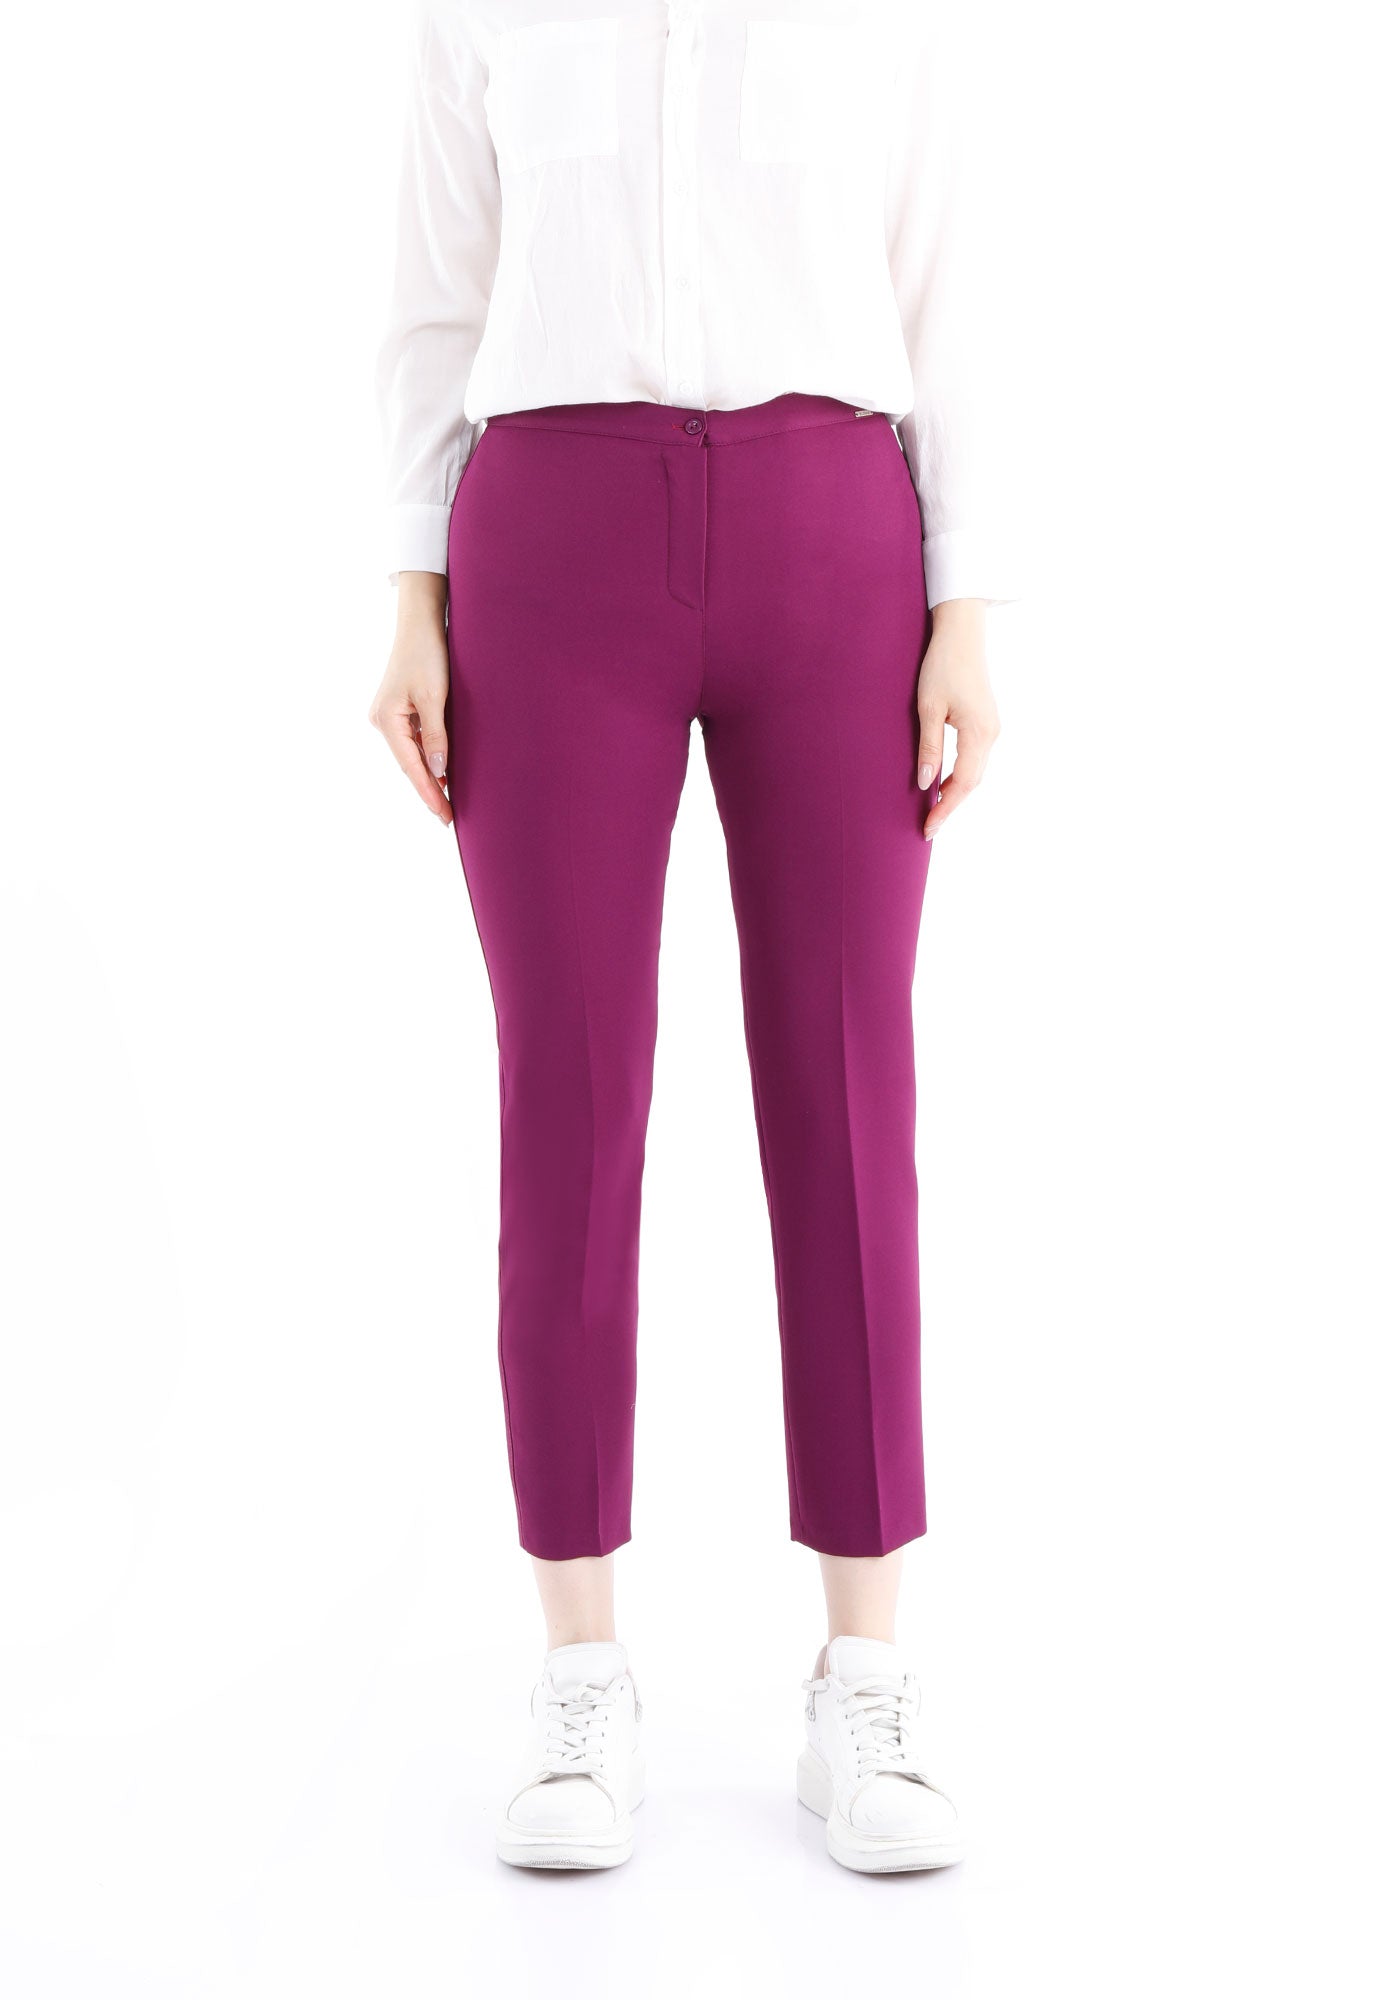 Copy of Mustard Ankle-Length Slim-Fit/Skinny Pants for Women by G-Line G-Line